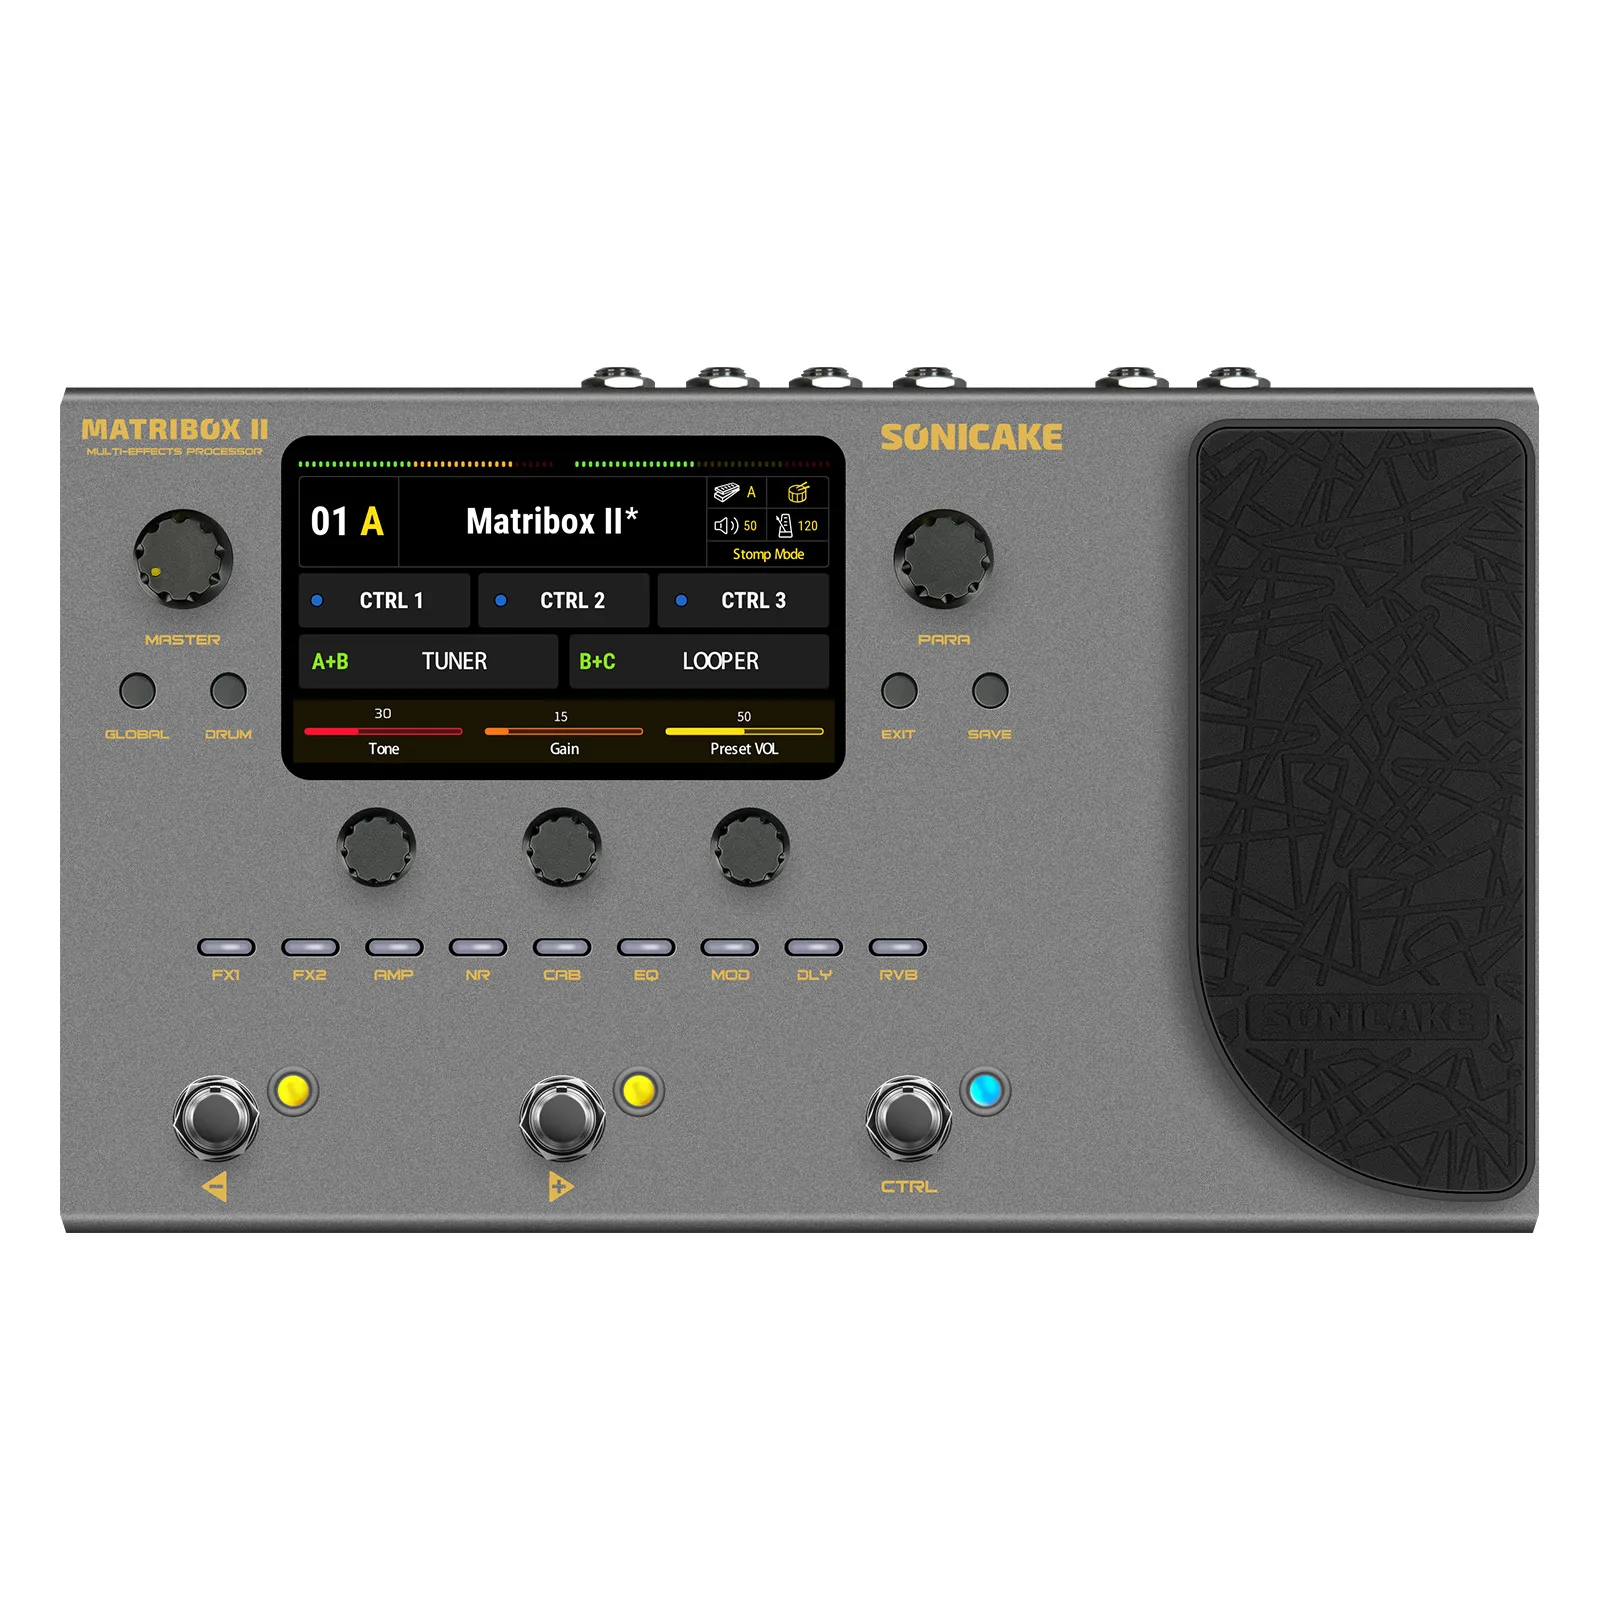 

SONICAKE Matribox II QME-100 Guitar Bass Amp Modeling Multi-Effects Processor with Expression Pedal FX Loop MIDI